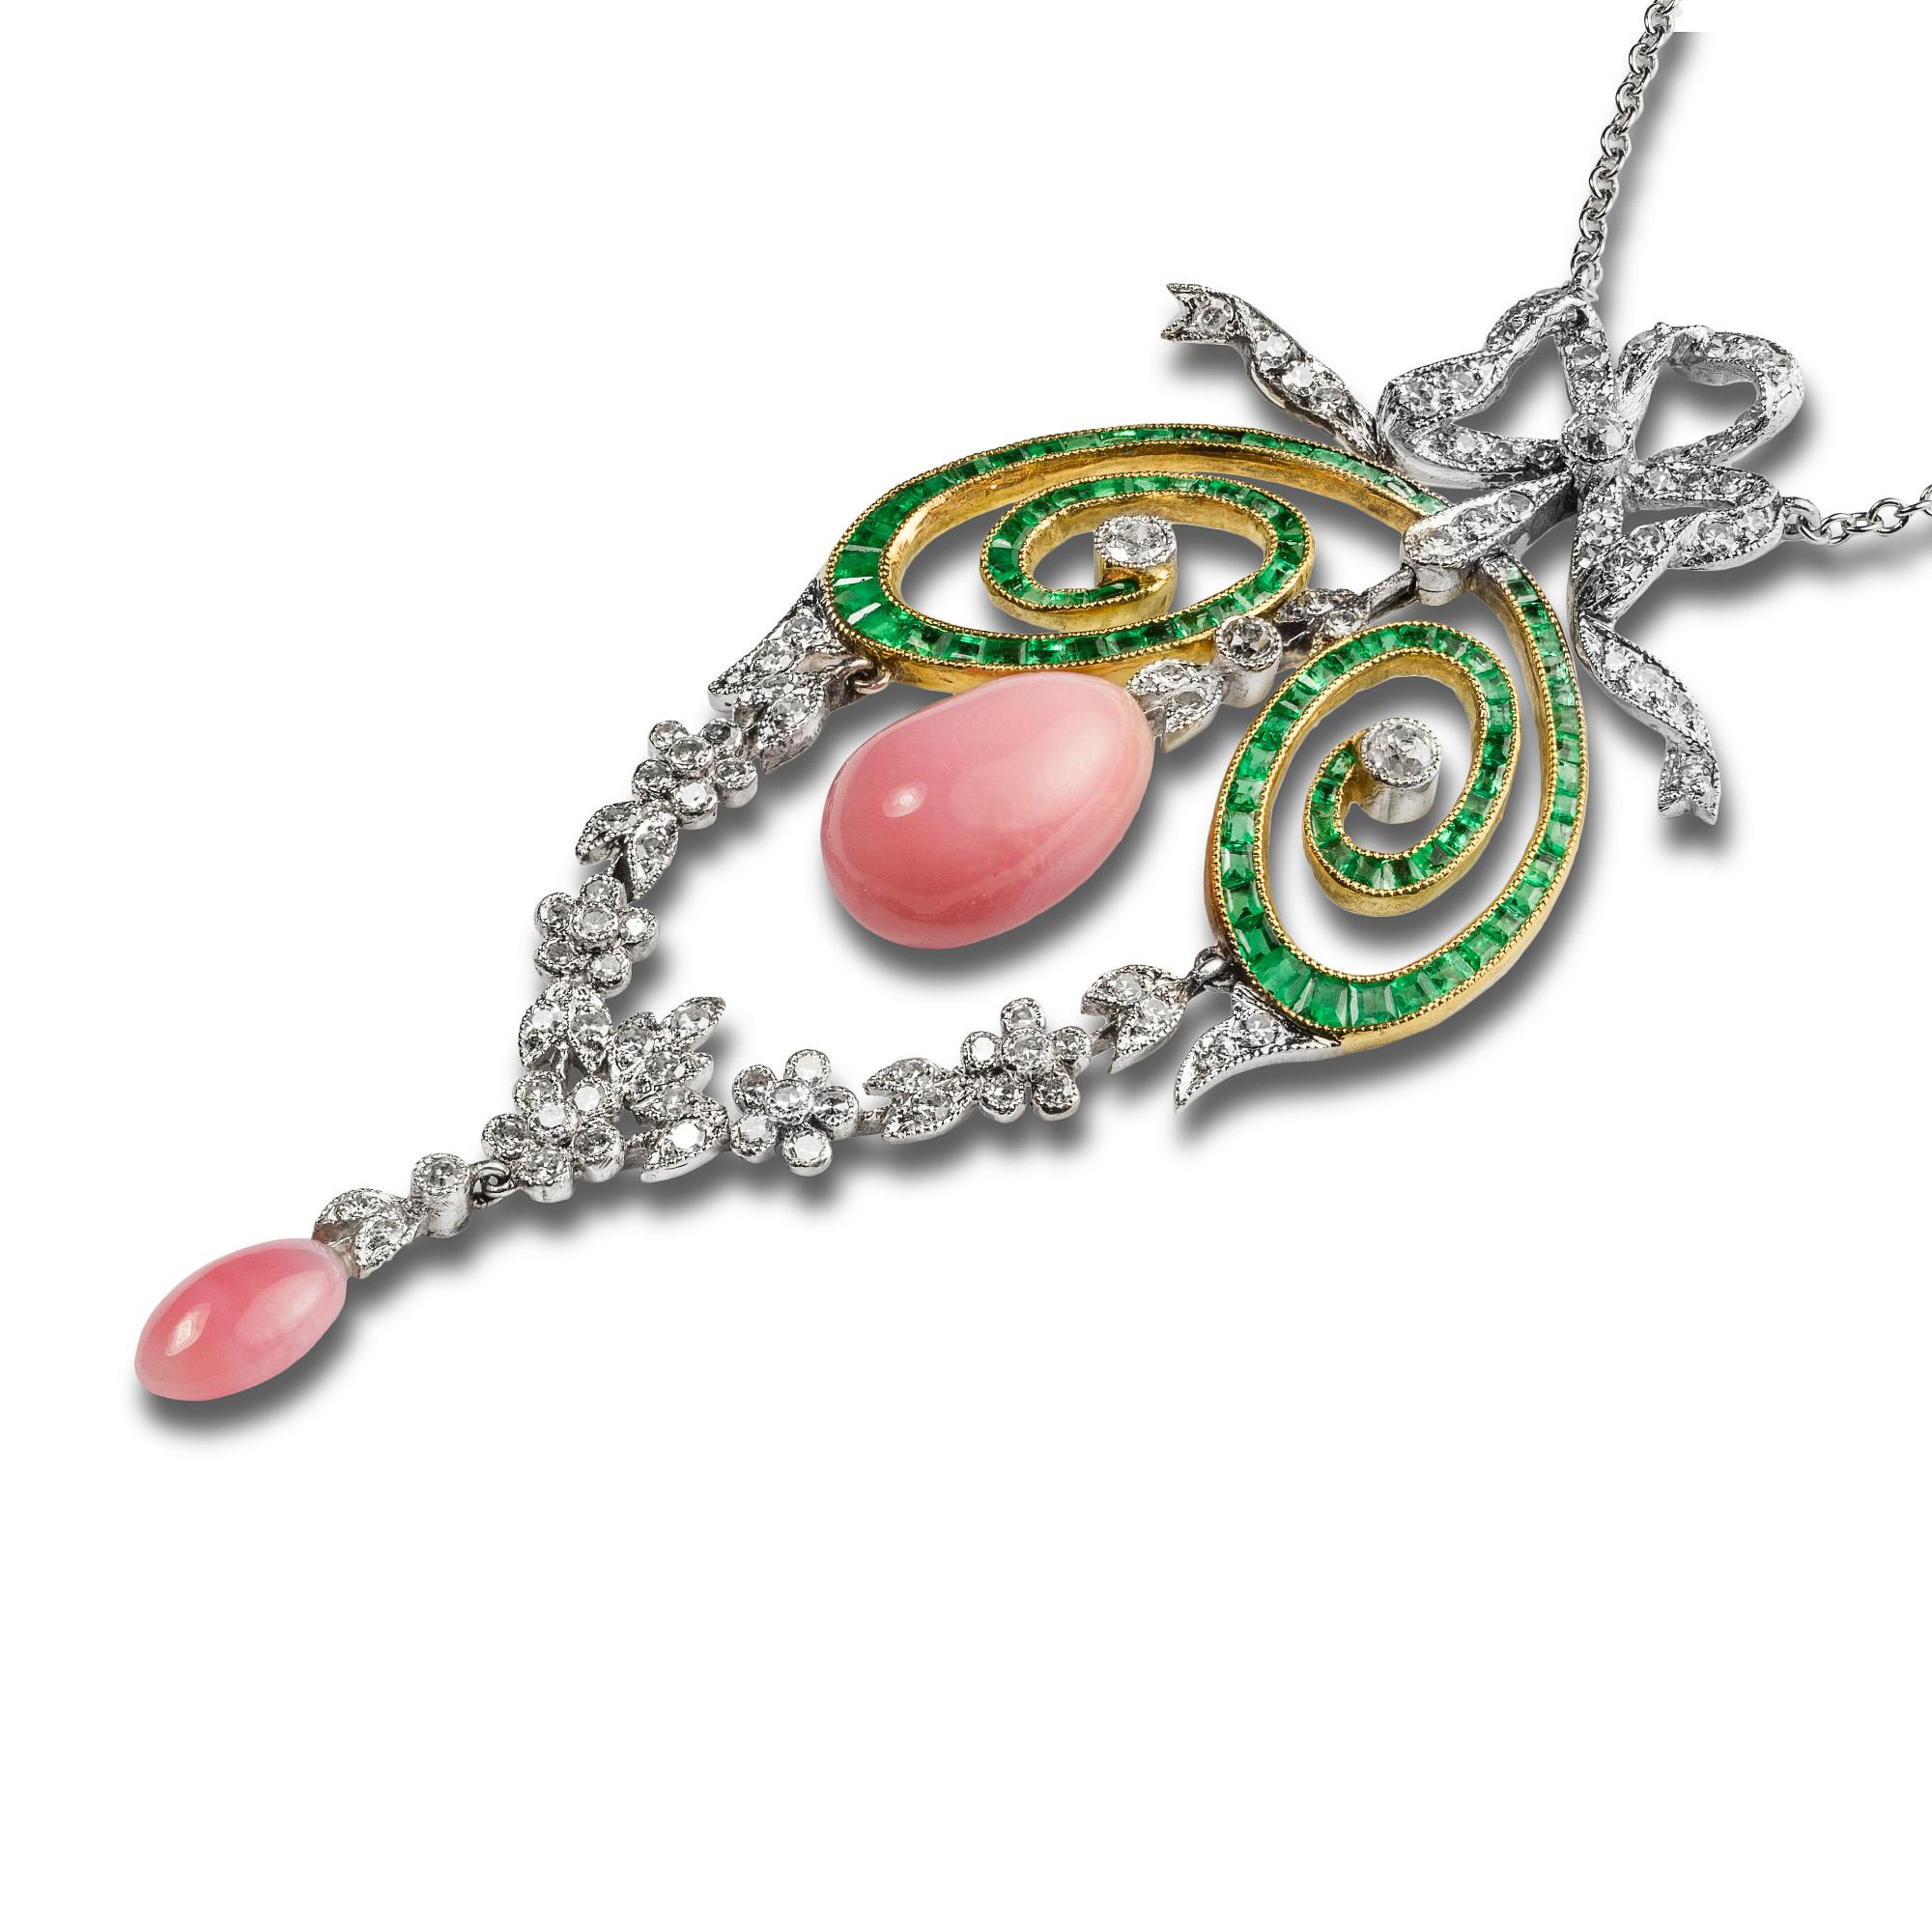 An Edwardian conch pearl, emerald and diamond pendant with later embellishments, the pear-shaped conch peal, measuring approximately 11.0 x 7.1mm, suspended by a diamond-set run between two calibre-cut emerald-set openwork scrolls, beneath a later